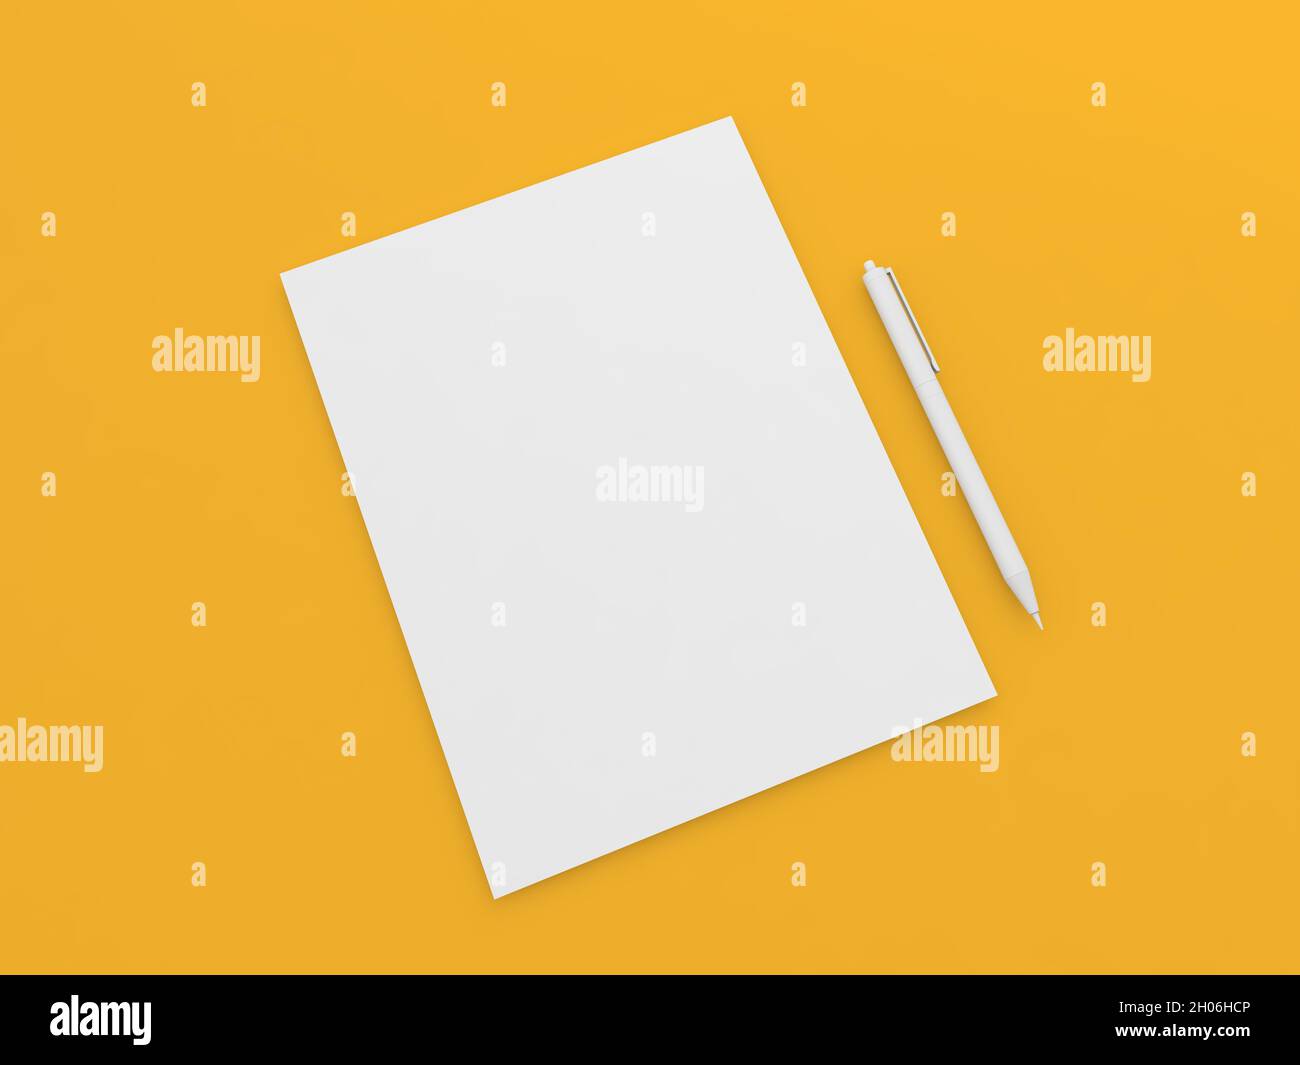 A4 paper sheet and pen on a yellow background. 3d render illustration. Stock Photo